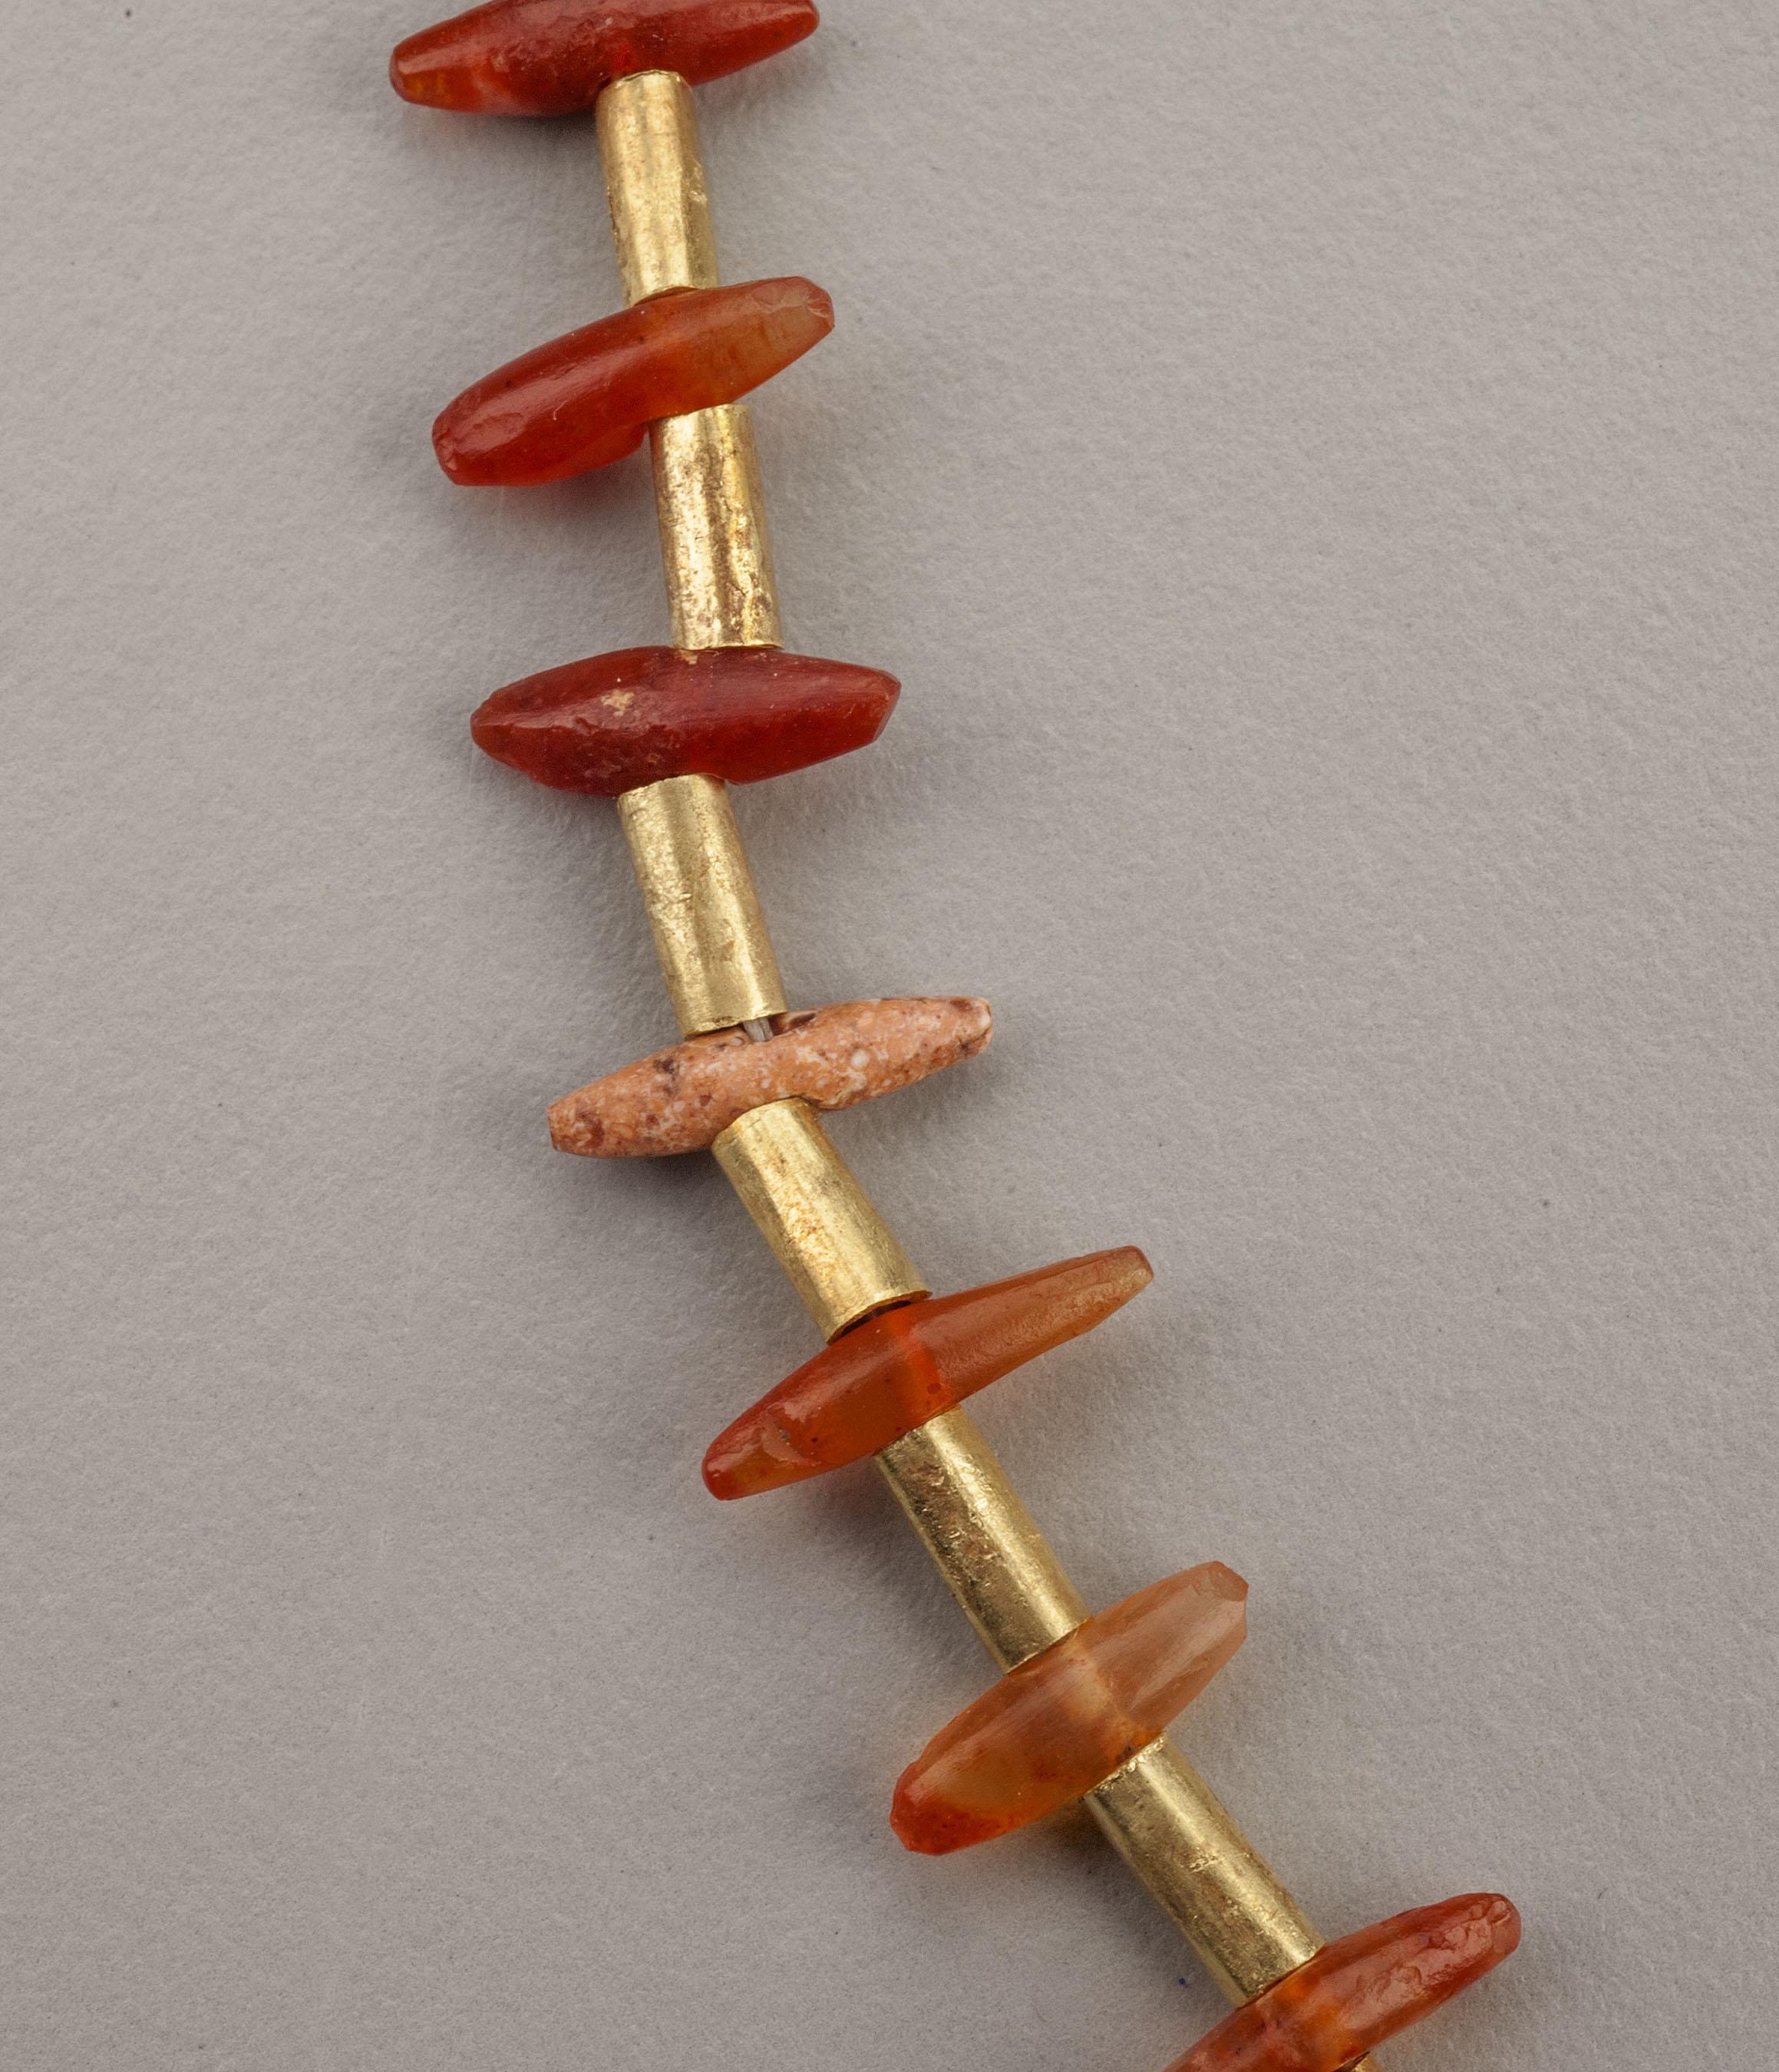 A necklace of fifty-five carnelian beads alternating with fifty-four 22k gold tube beads. Fifty-three of the carnelian beads are of an unusual form being long spar shapes pointed on each end and drilled through the middle. The width at the middle